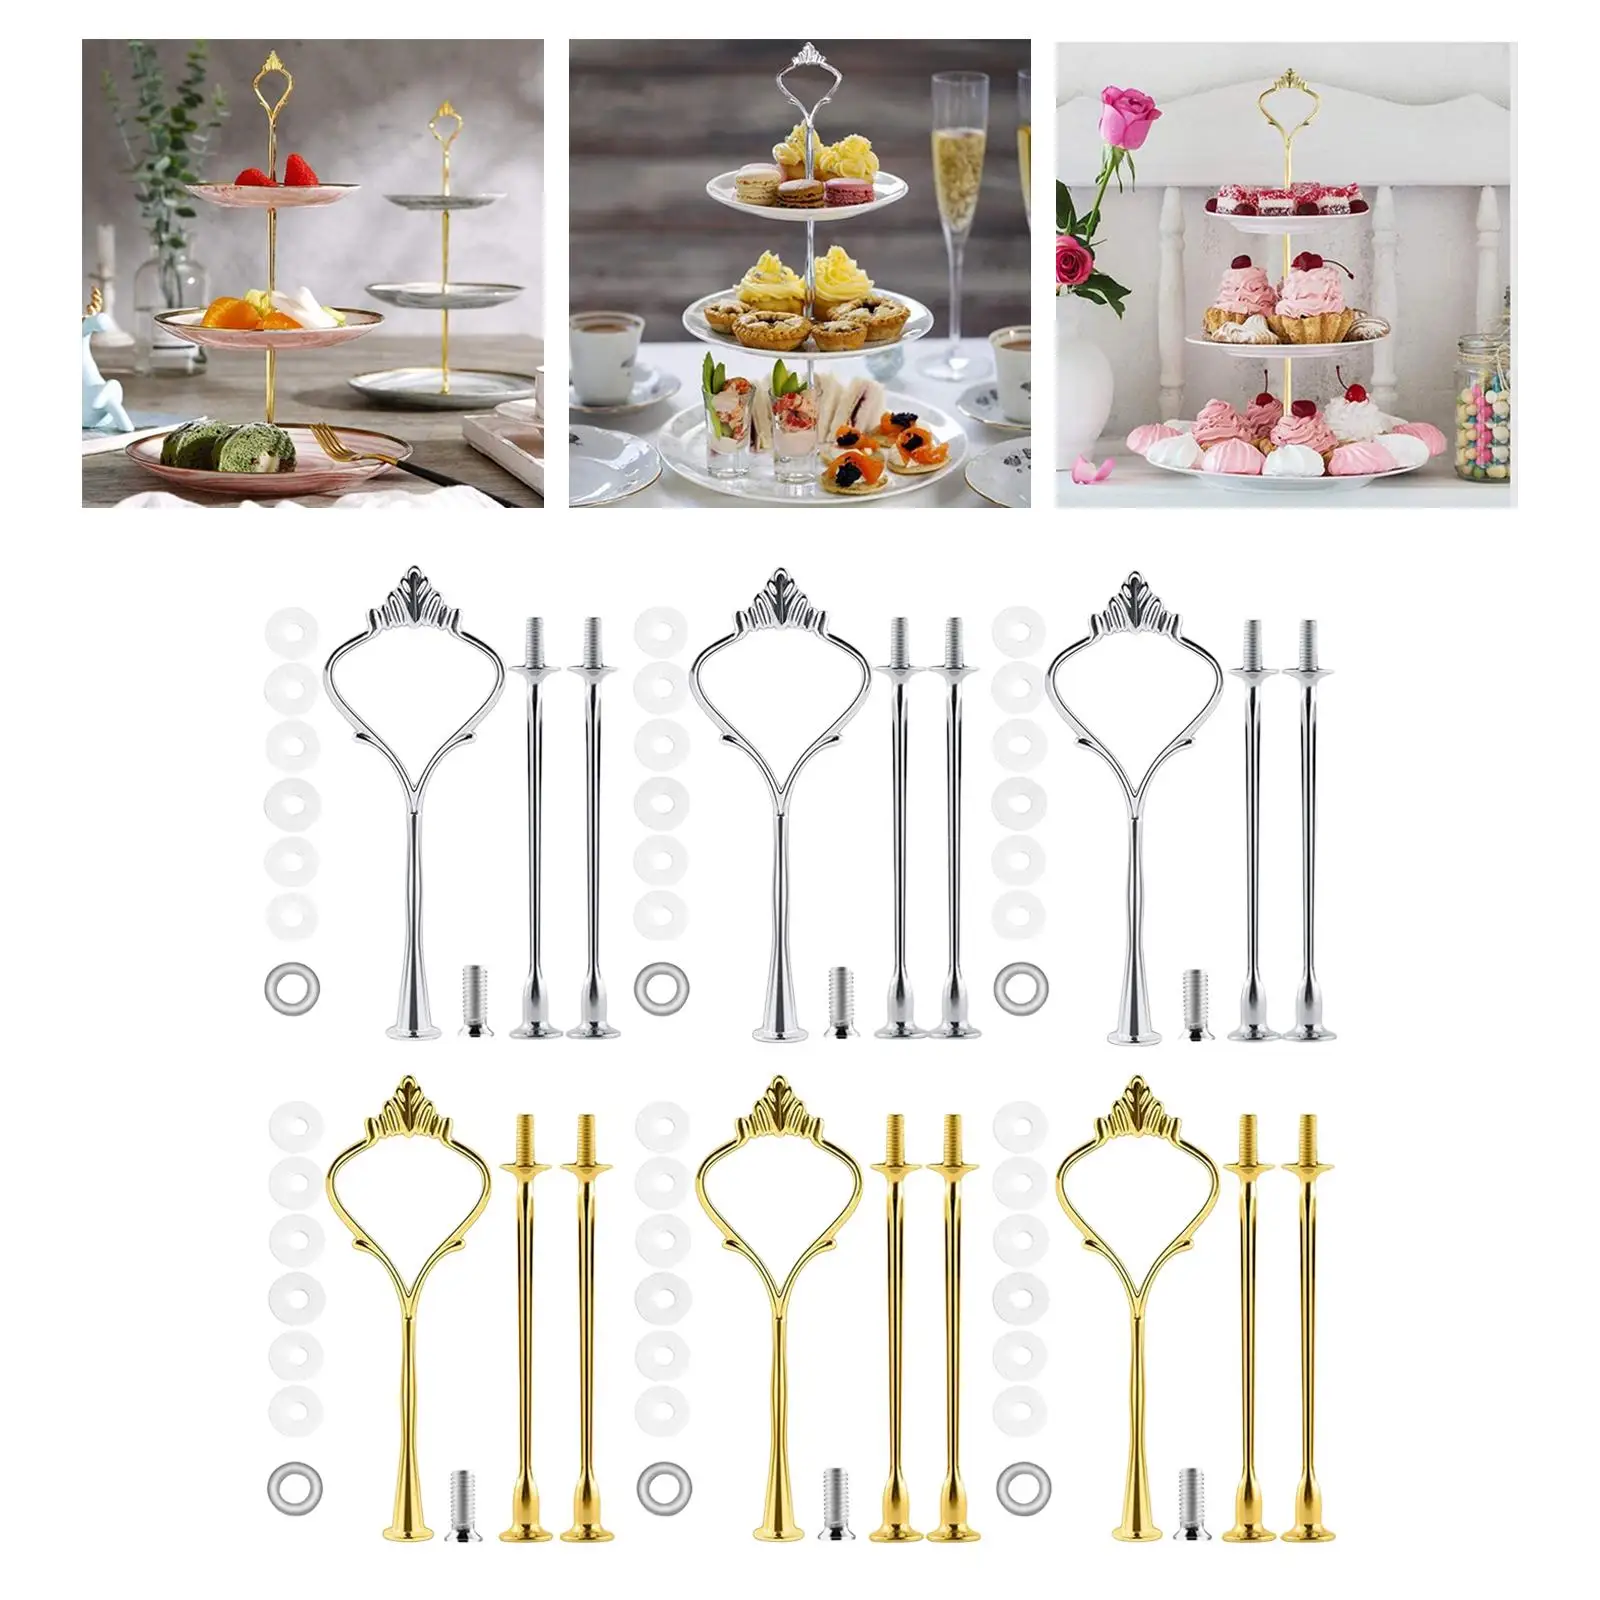 Plate Stand Handles Sturdy Fitting 3 Tier Cupcake Plate Stand Hardware Rod for Kitchen Wedding Party Anniversary Shop